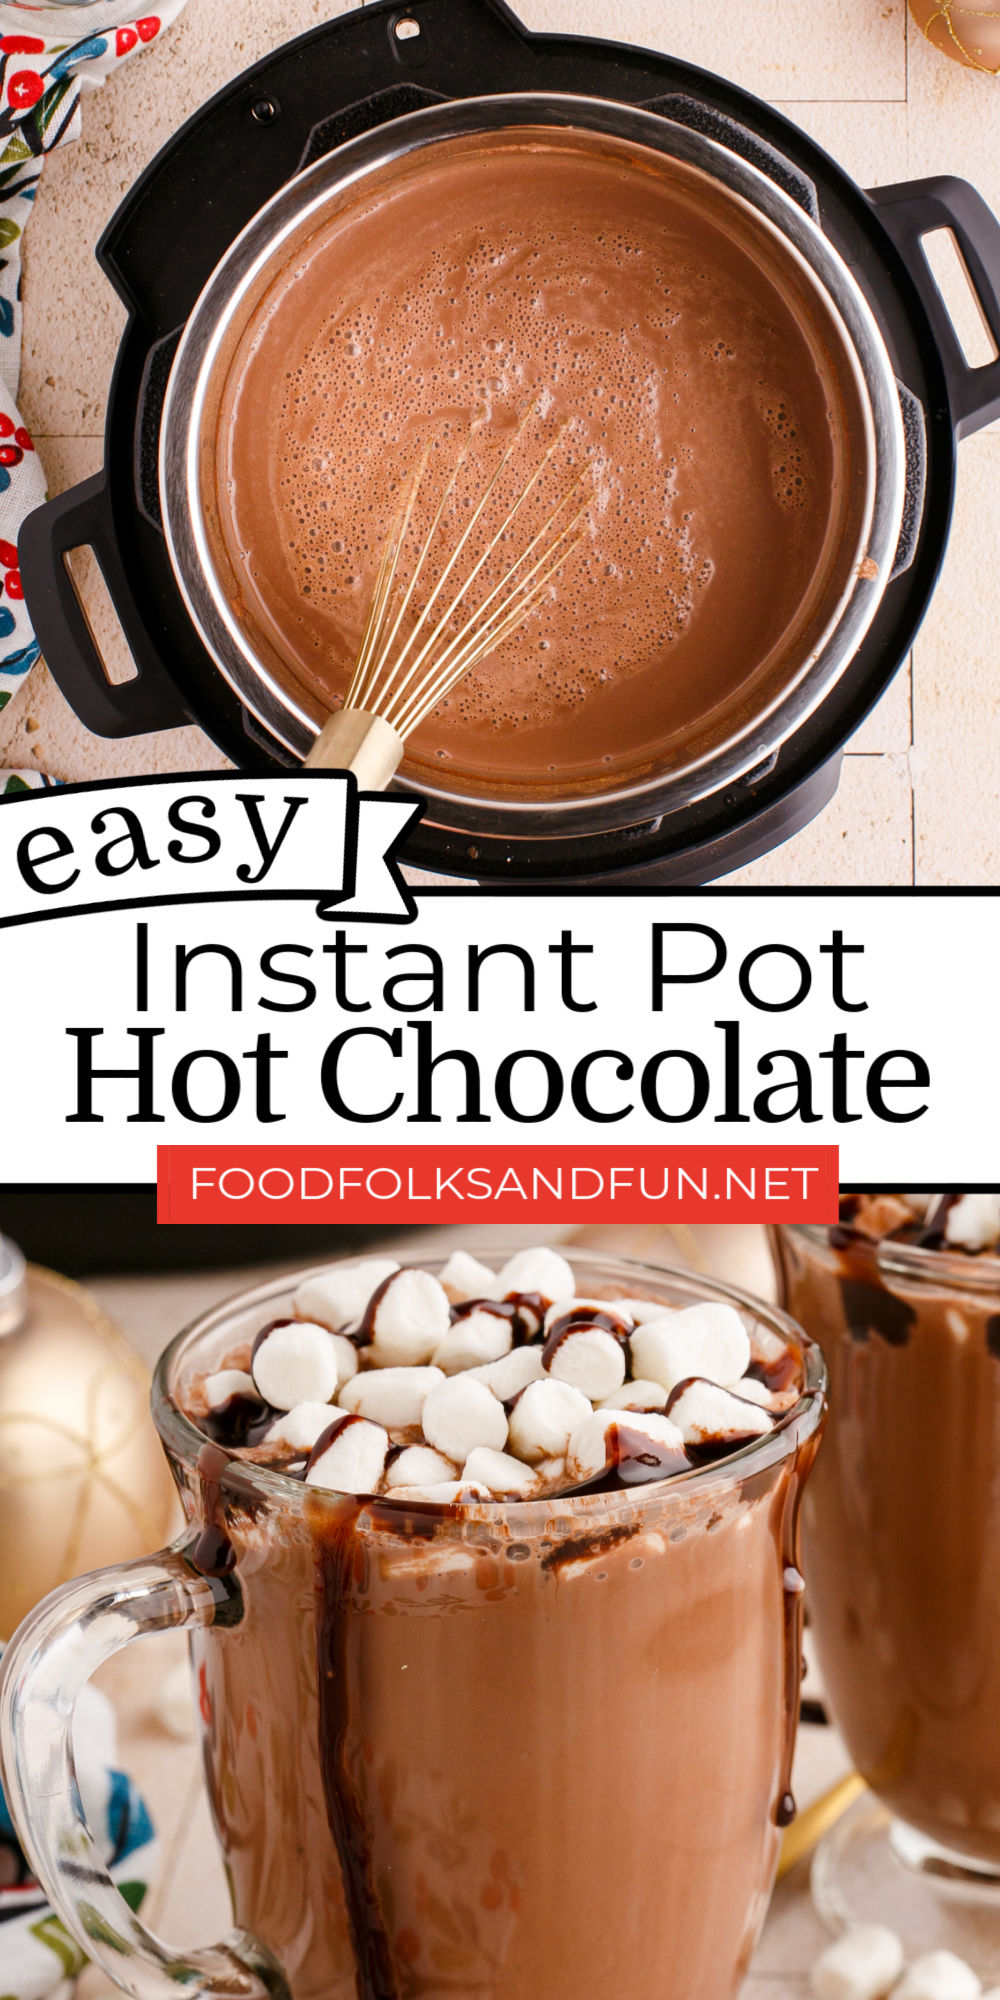 This Instant Pot Hot Chocolate recipe is creamy, chocolaty, and easy to whip up in just 15 minutes. This recipe can be doubled and tripled for large parties and gatherings. via @foodfolksandfun